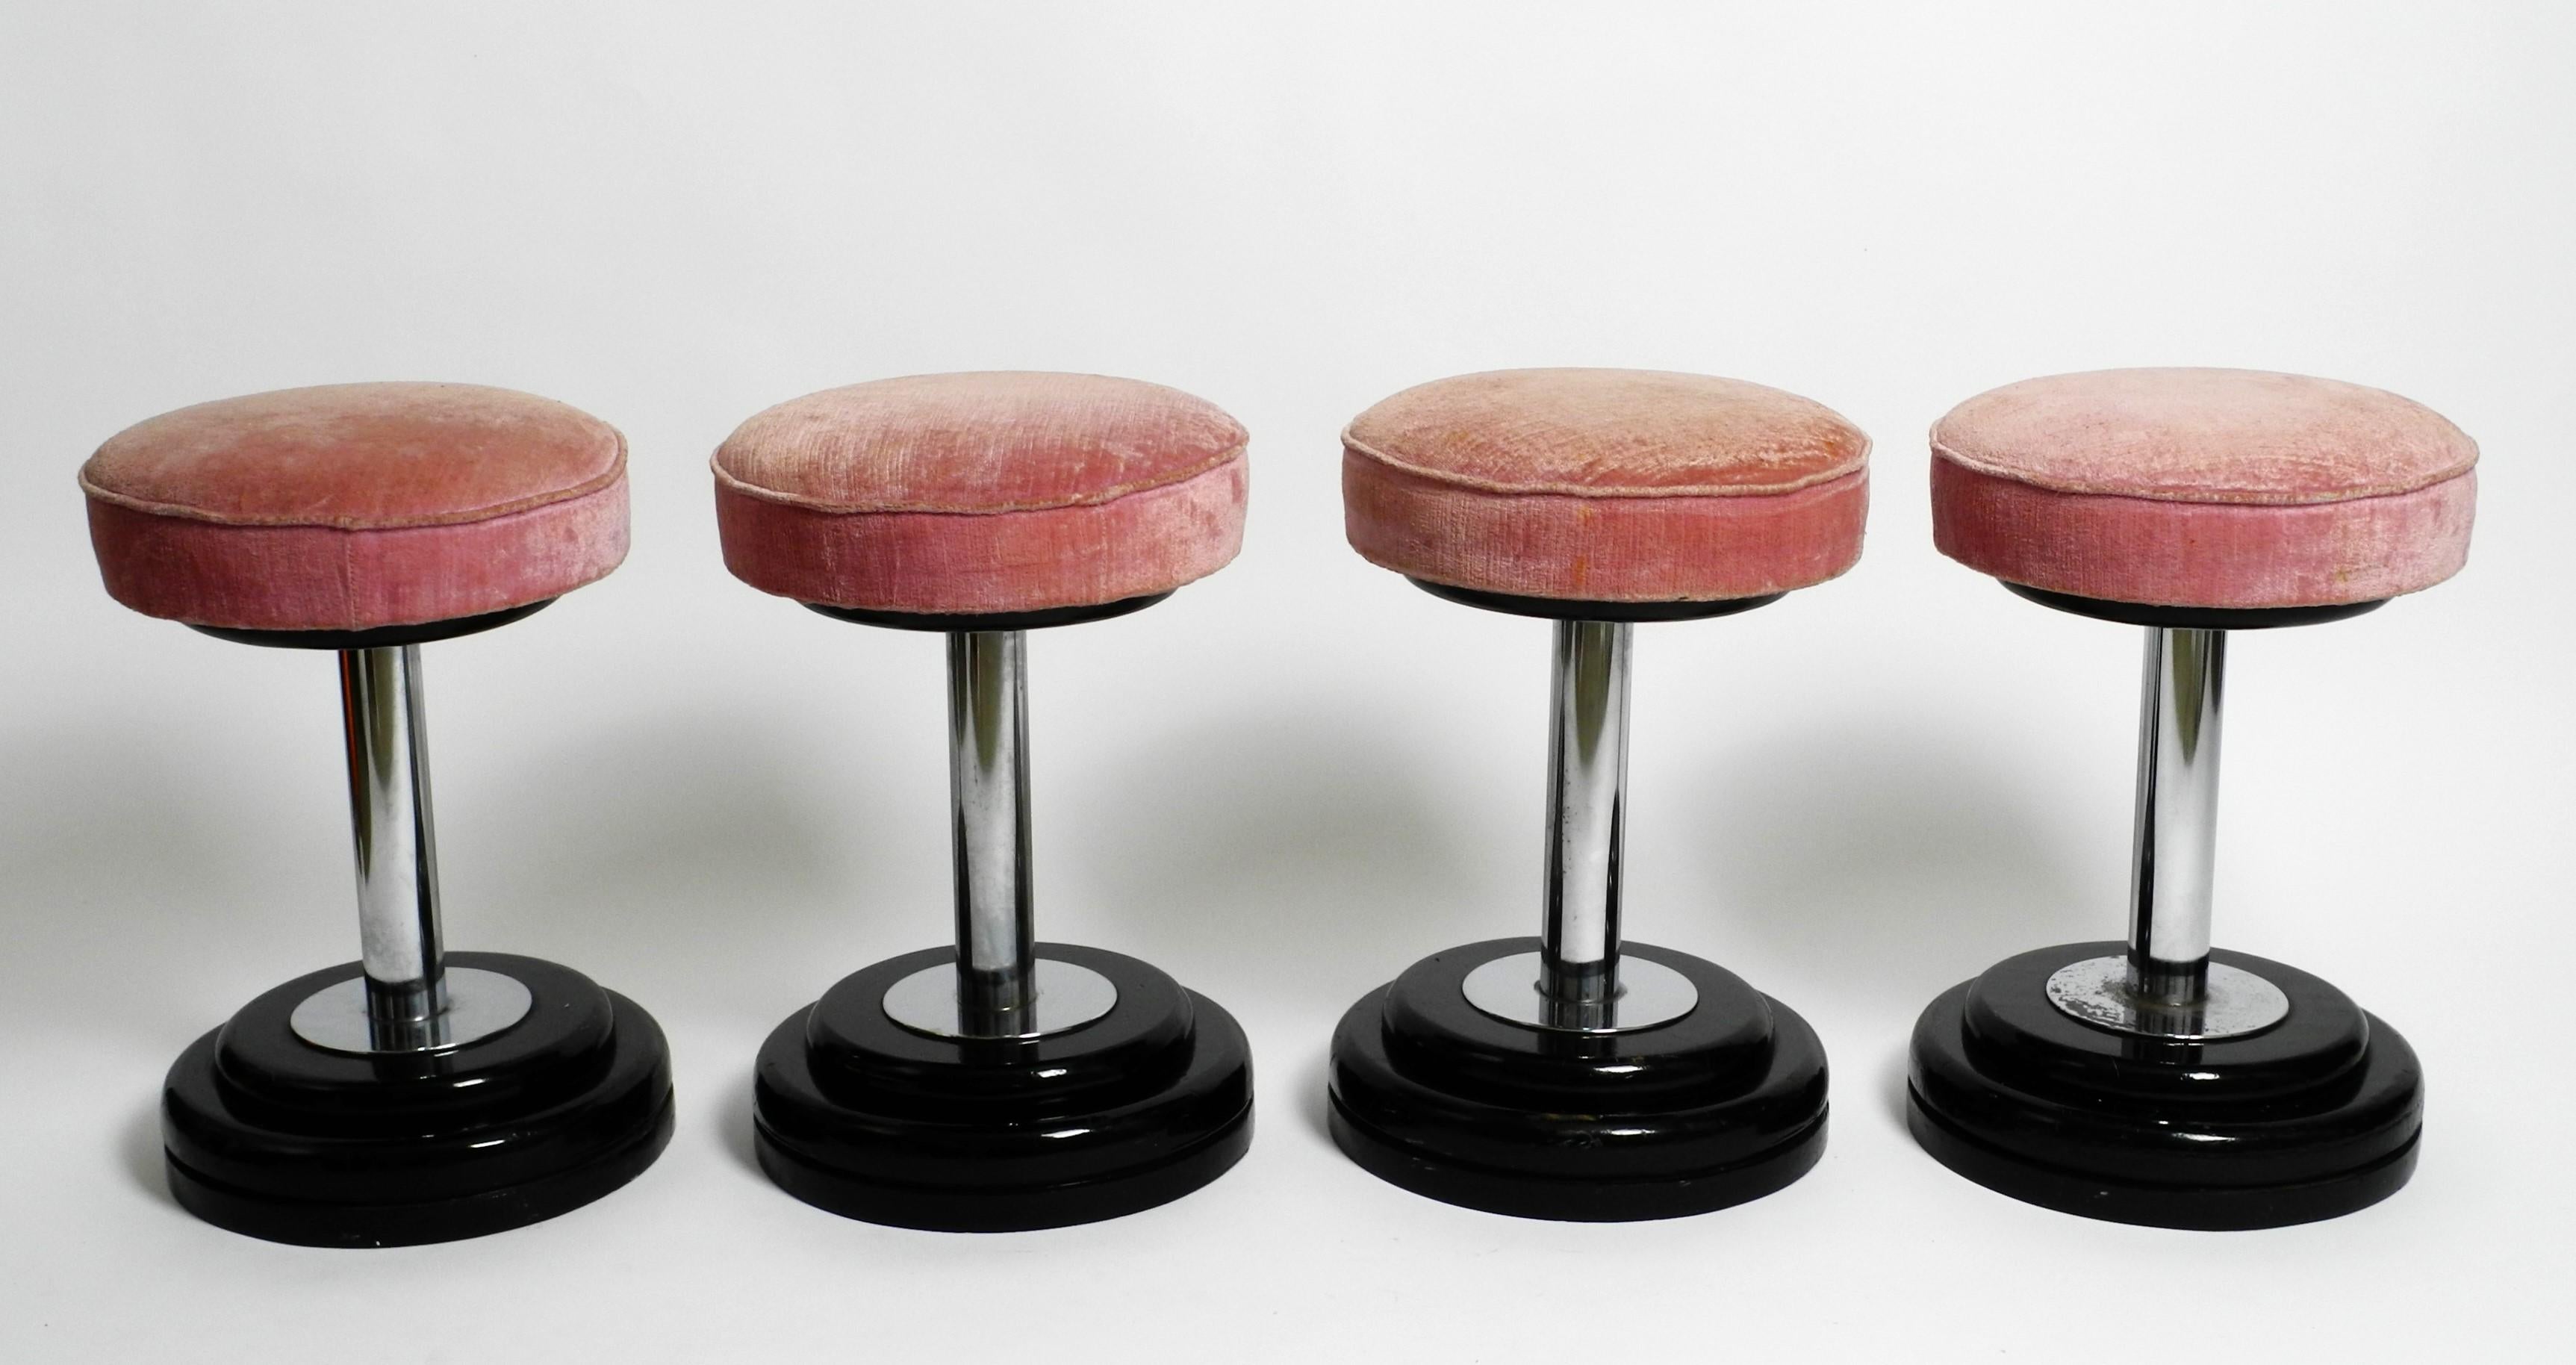 Stunning set of four Stools in Art Deco Style. Likely manufactured circa 1950.

Heavy wooden base. Chrome-plated steel tube. Padded seat with pink velvet cover.

They can be wonderfully combined with a coffee table or also be used with a dining